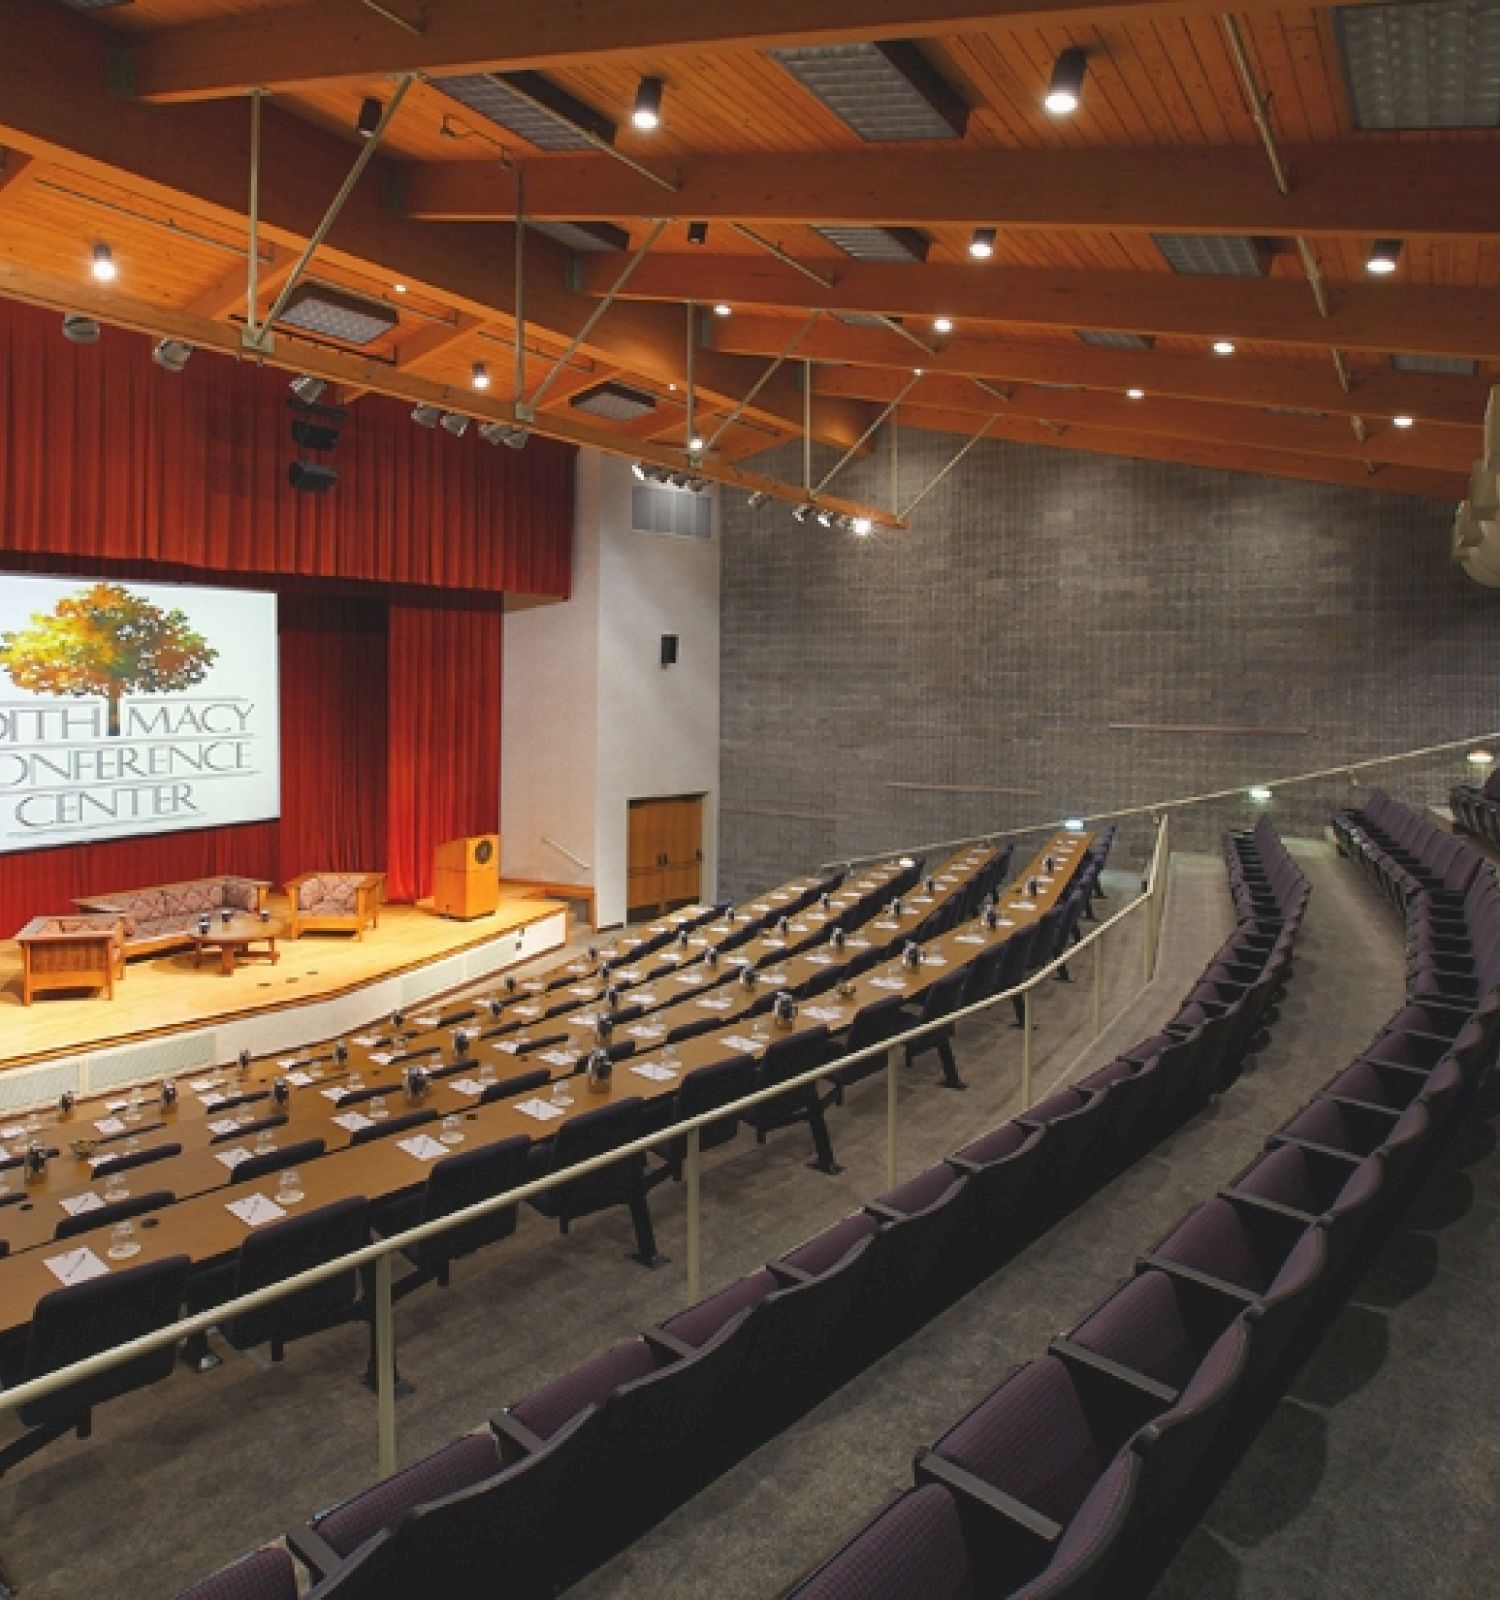 Auditorium with seats facing a stage and a projected screen.